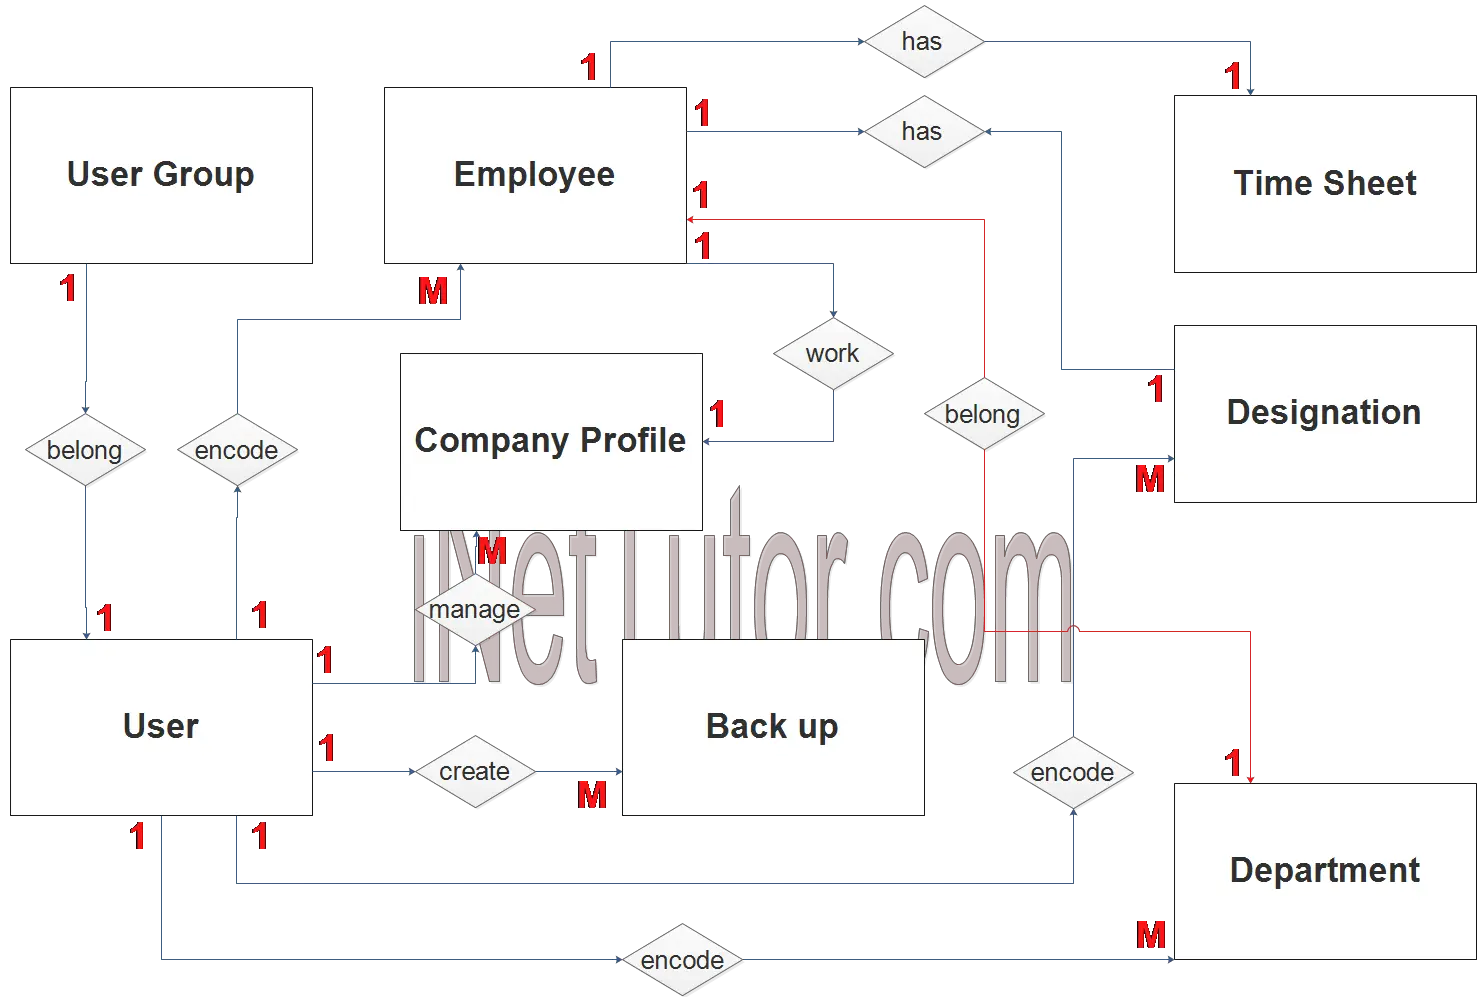 Daily Time Record System ER Diagram - Step 2 Table Relationship